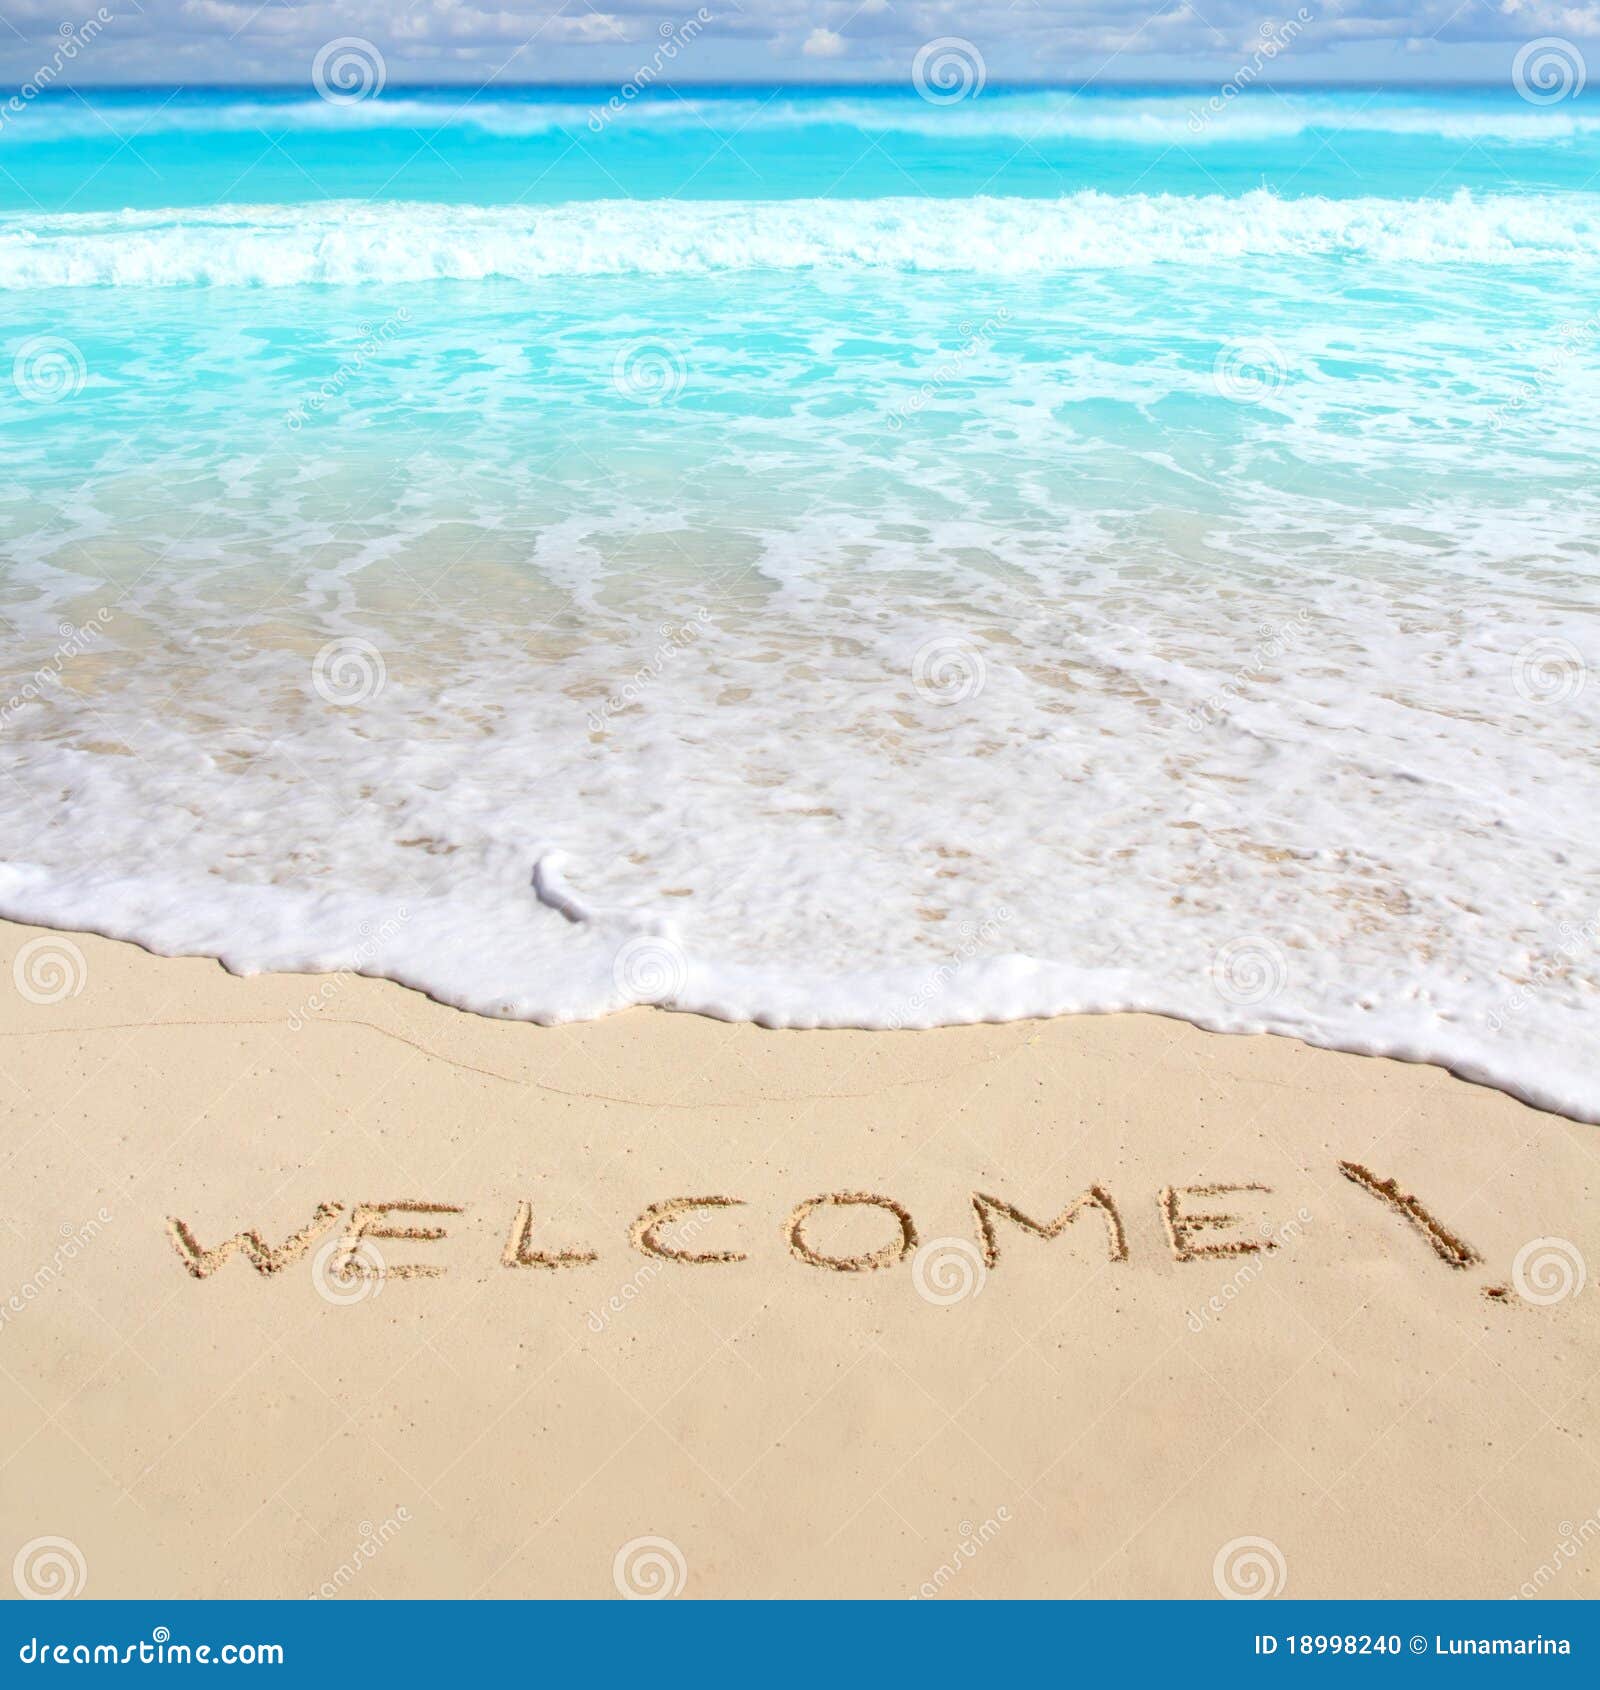 greetings welcome beach spell written on sand